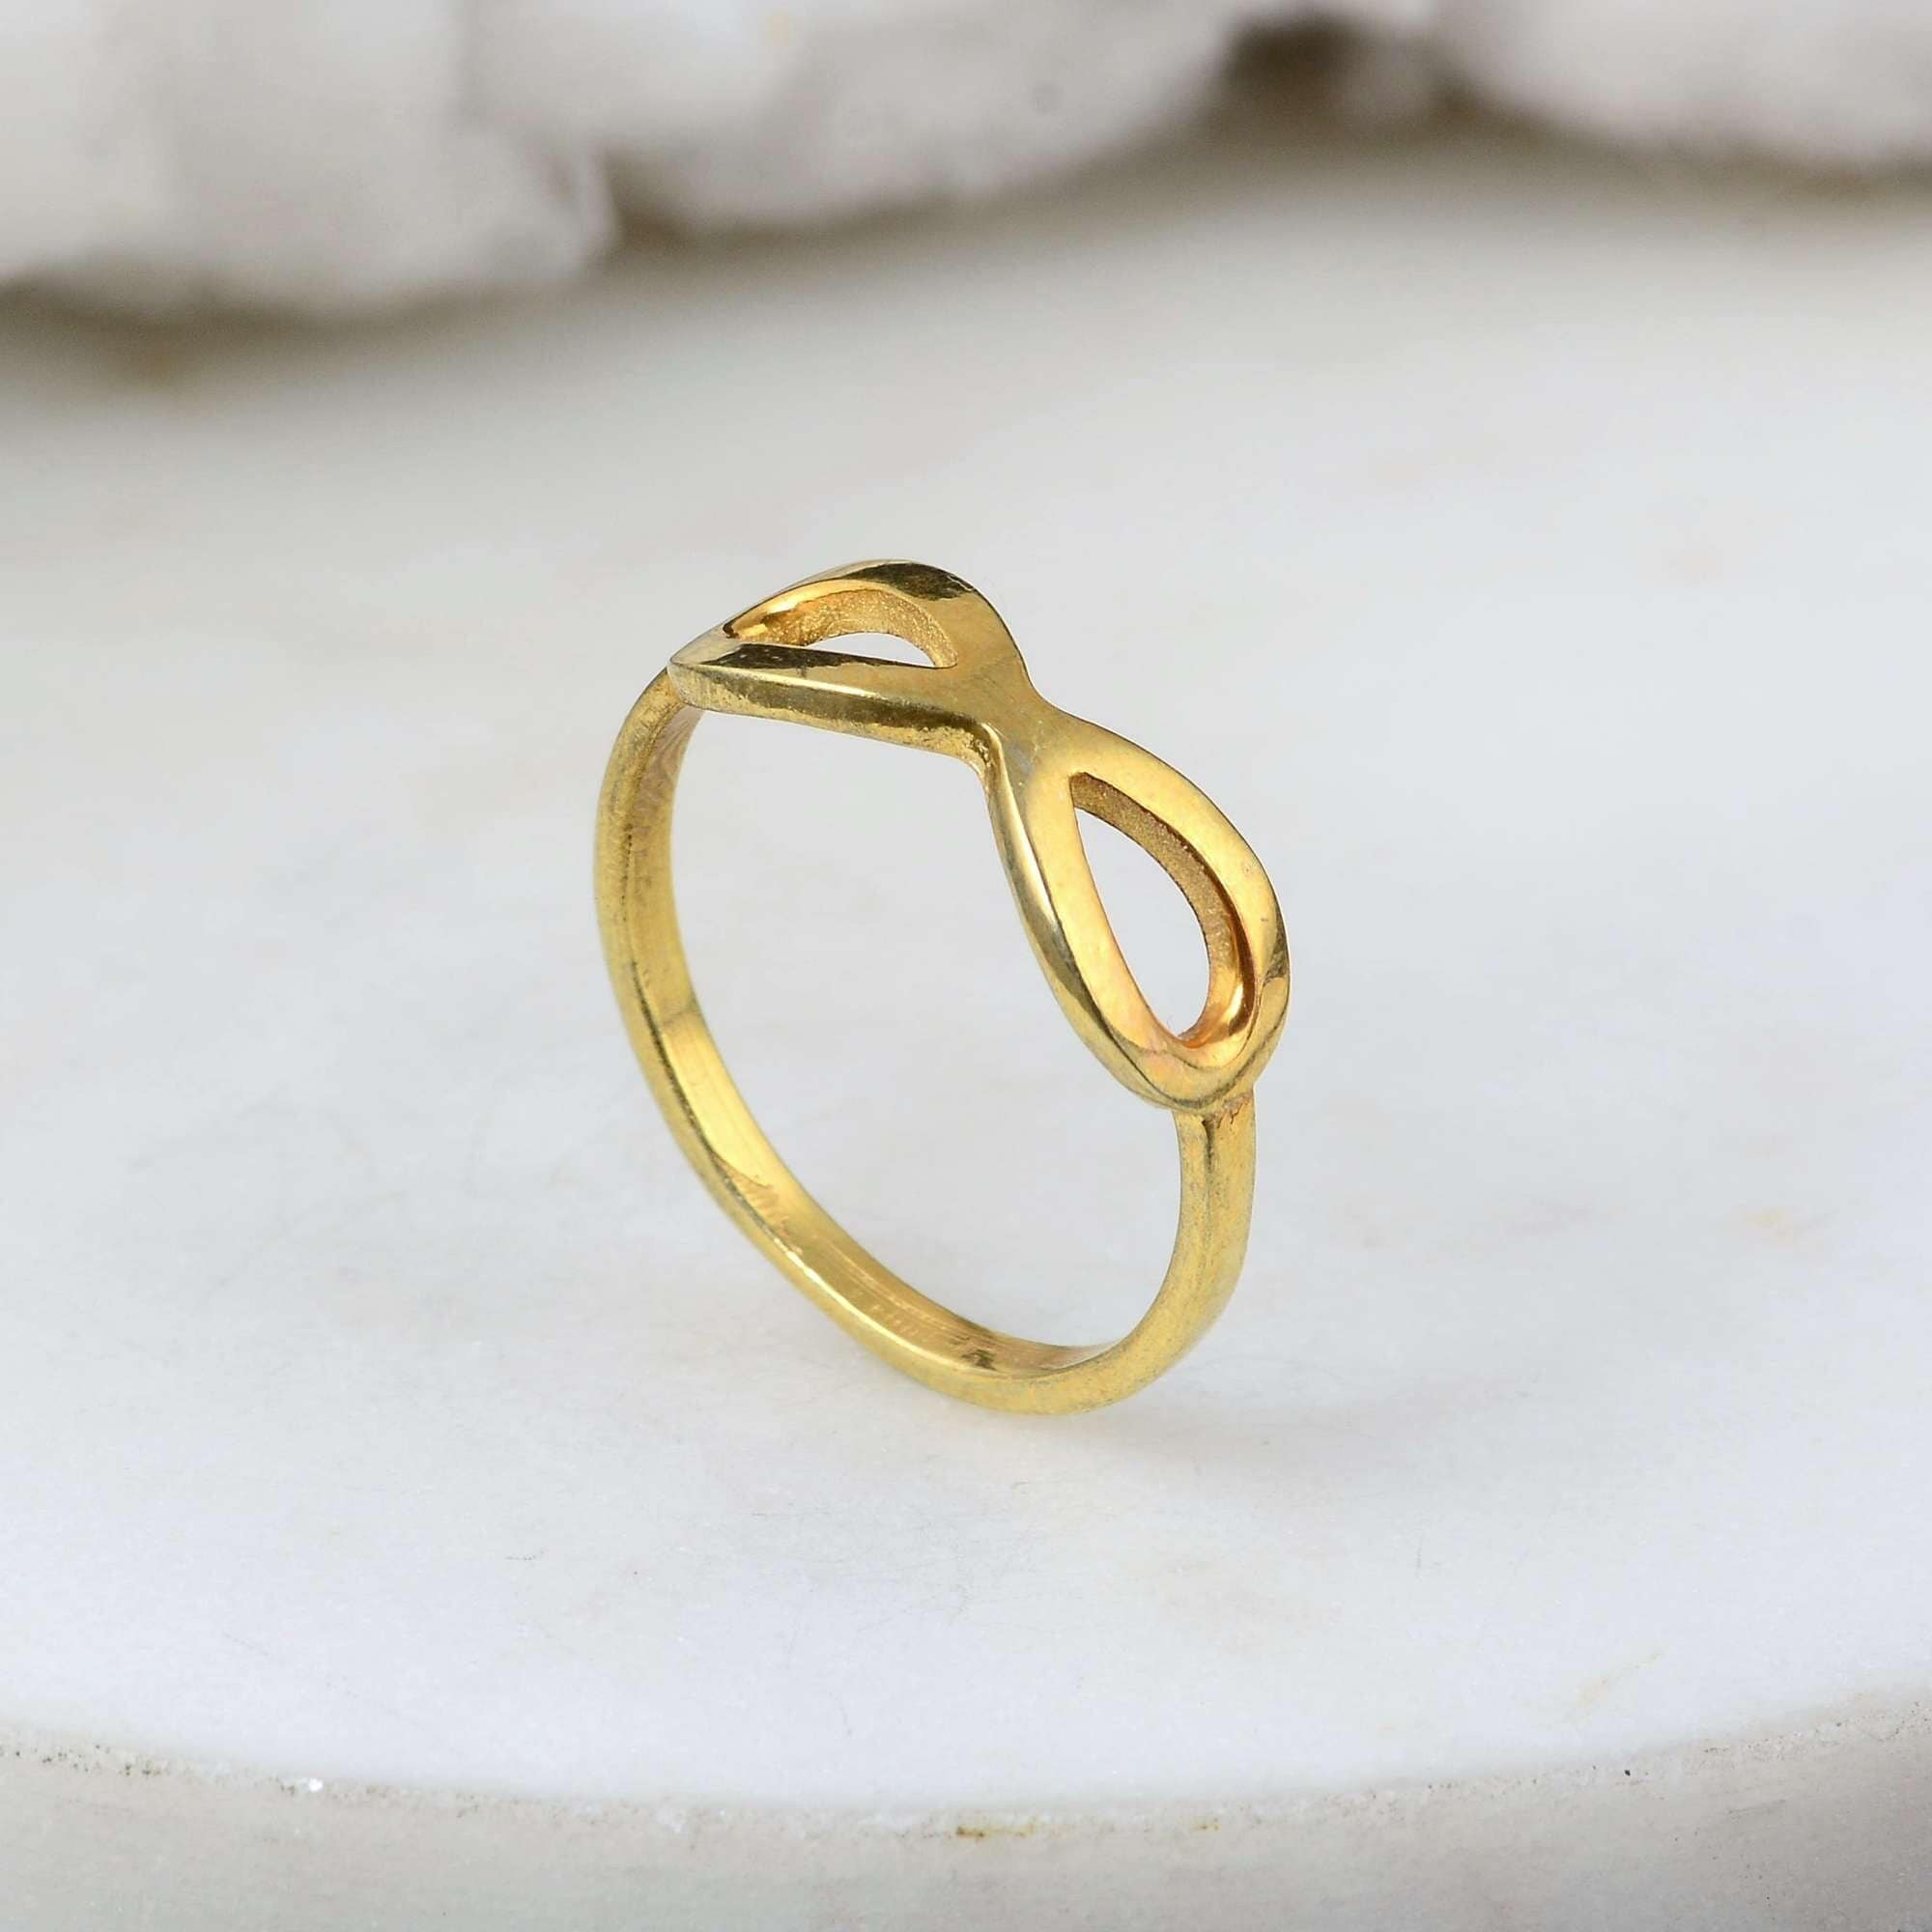 Daily wear gold ring | shop 22ct gold ring in UK | PureJewels UK